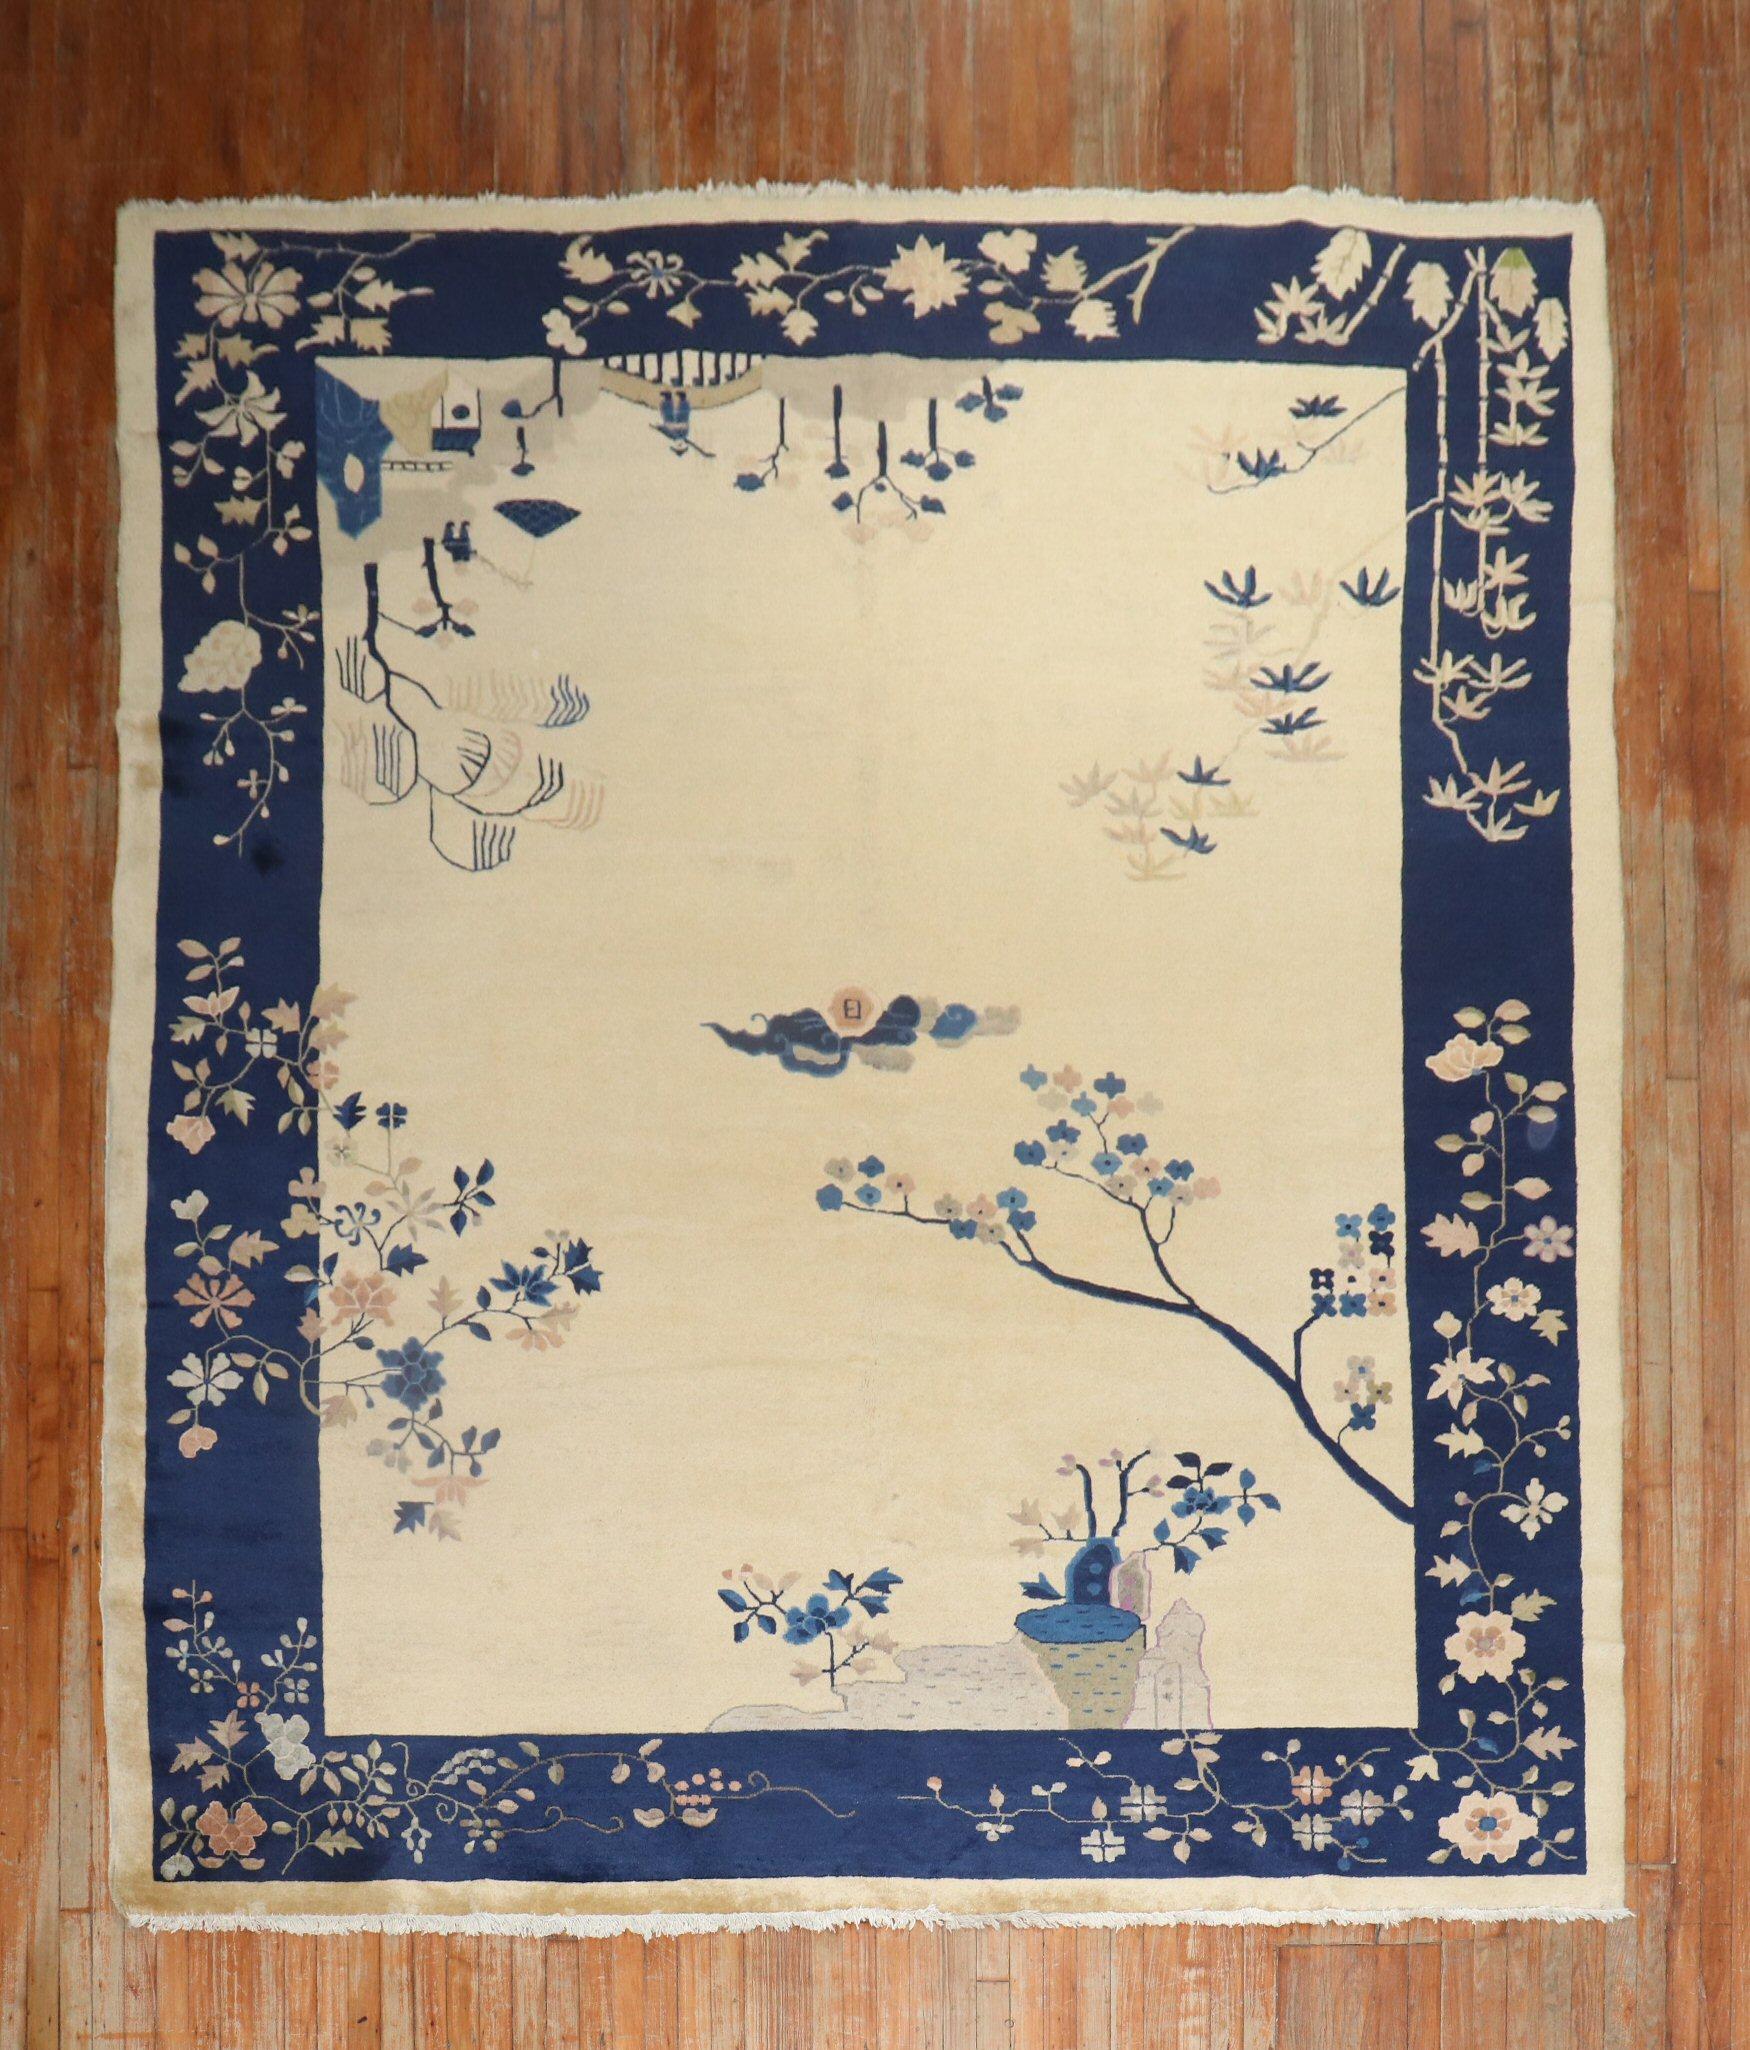 Full Pile Chinese Room size Pictorial rug from the 2nd quarter of the 20th century predominantly in beige and navy blue

Measures: 8'8'' x 11'5''.